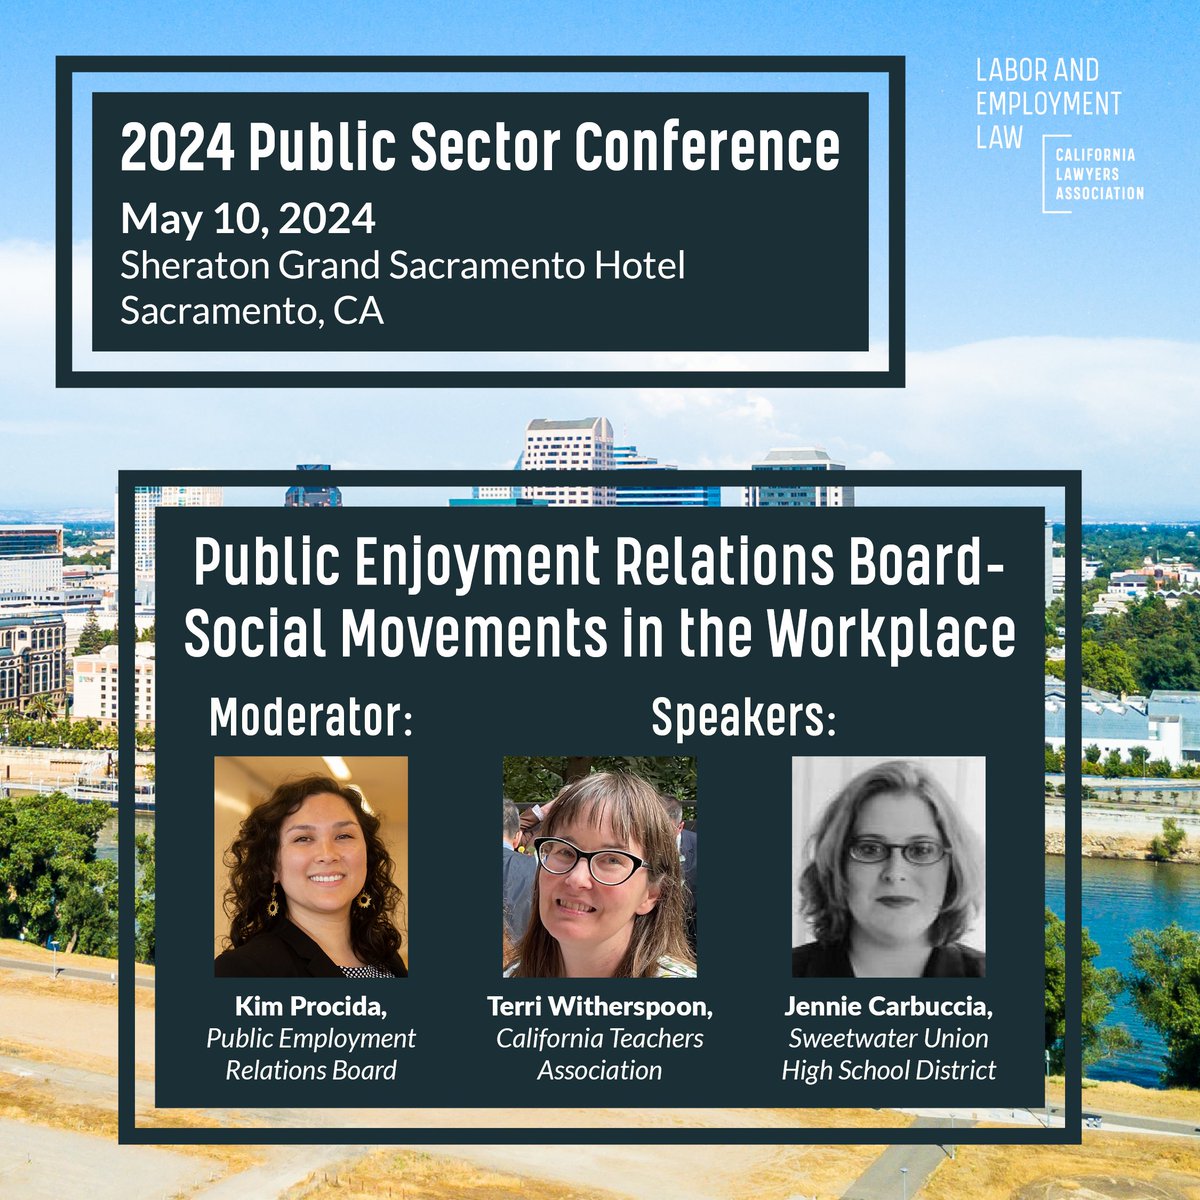 🌈 Explore the intersection of social movements and workplace dynamics at the 2024 Public Sector Conference.

Review the full schedule and register today 👇

calawyers.org/event/2024-pub…

#CALawyers #MCLEEvent #TogetherWeLaw #LaborLaw #PublicSector